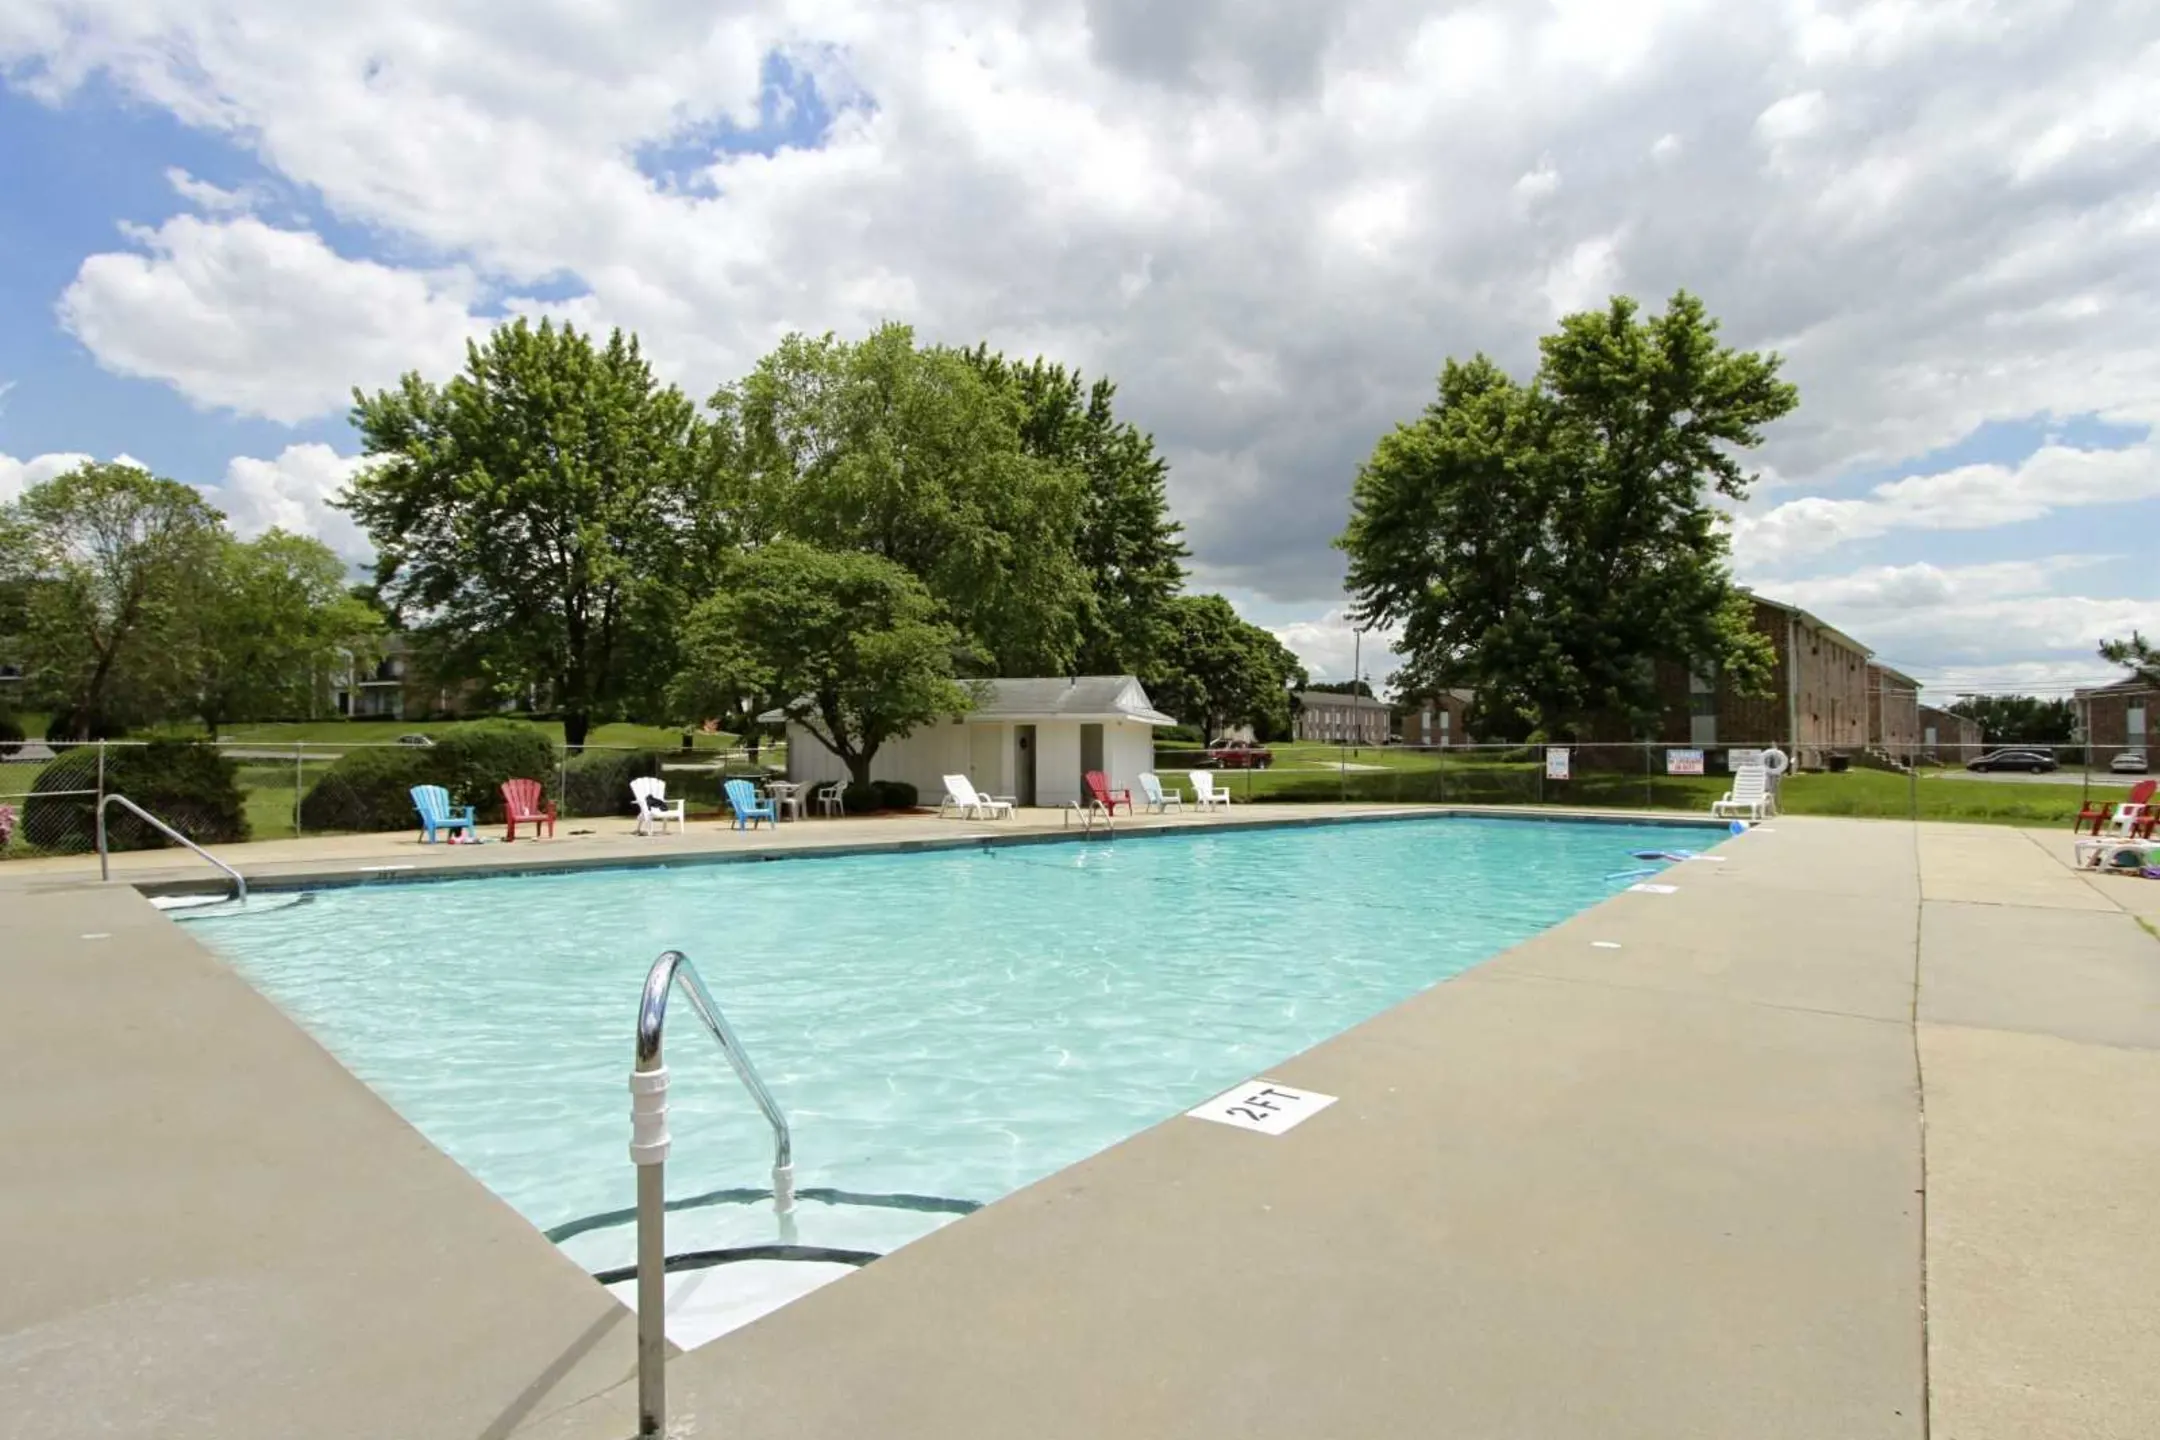 Pool - Colonial Gardens & Cherbourg Apartments - Overland Park, KS